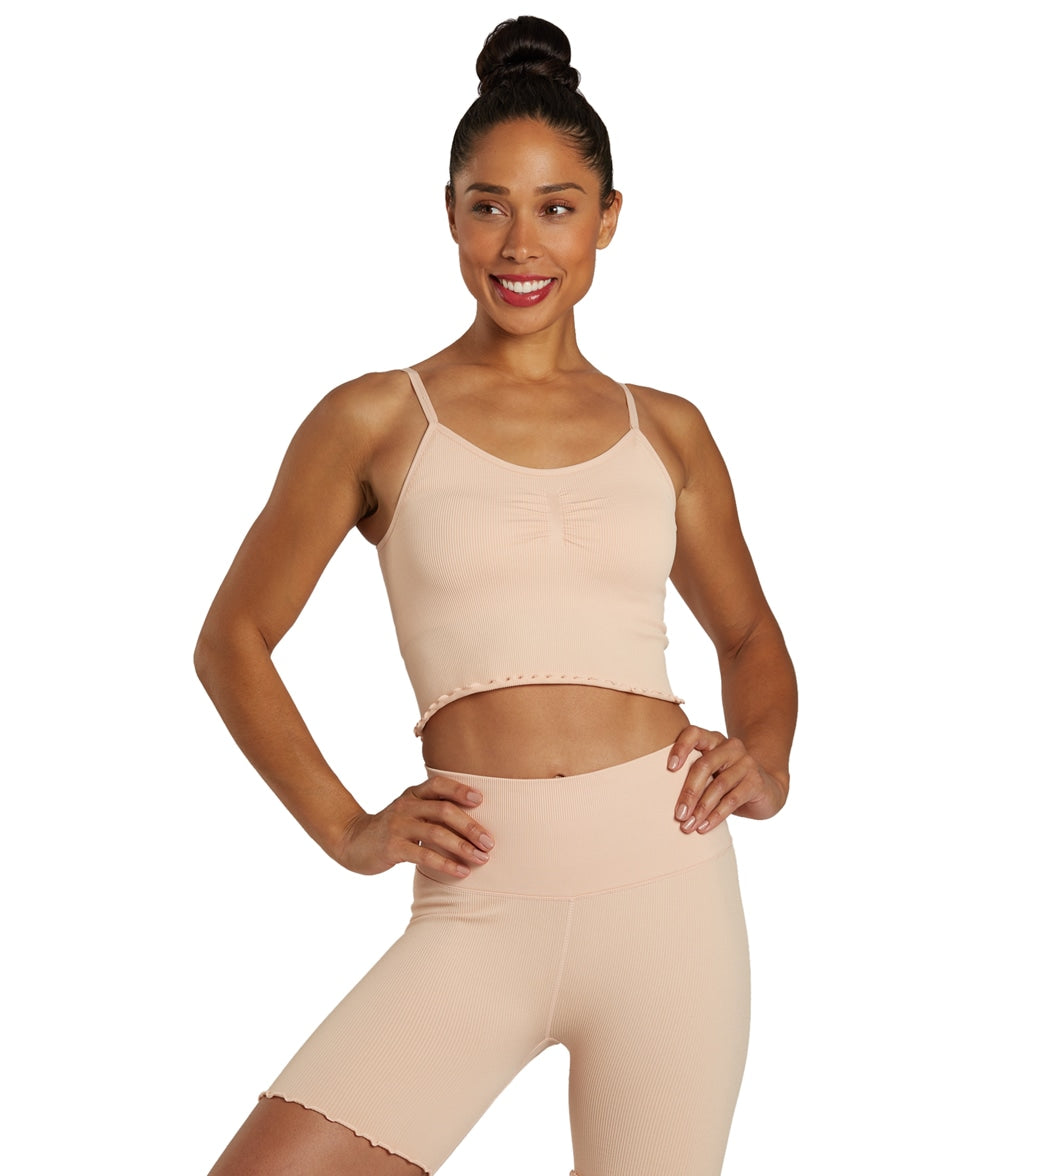 GAIAM - Warrior Seamless Scoopneck Workout Top - Size S